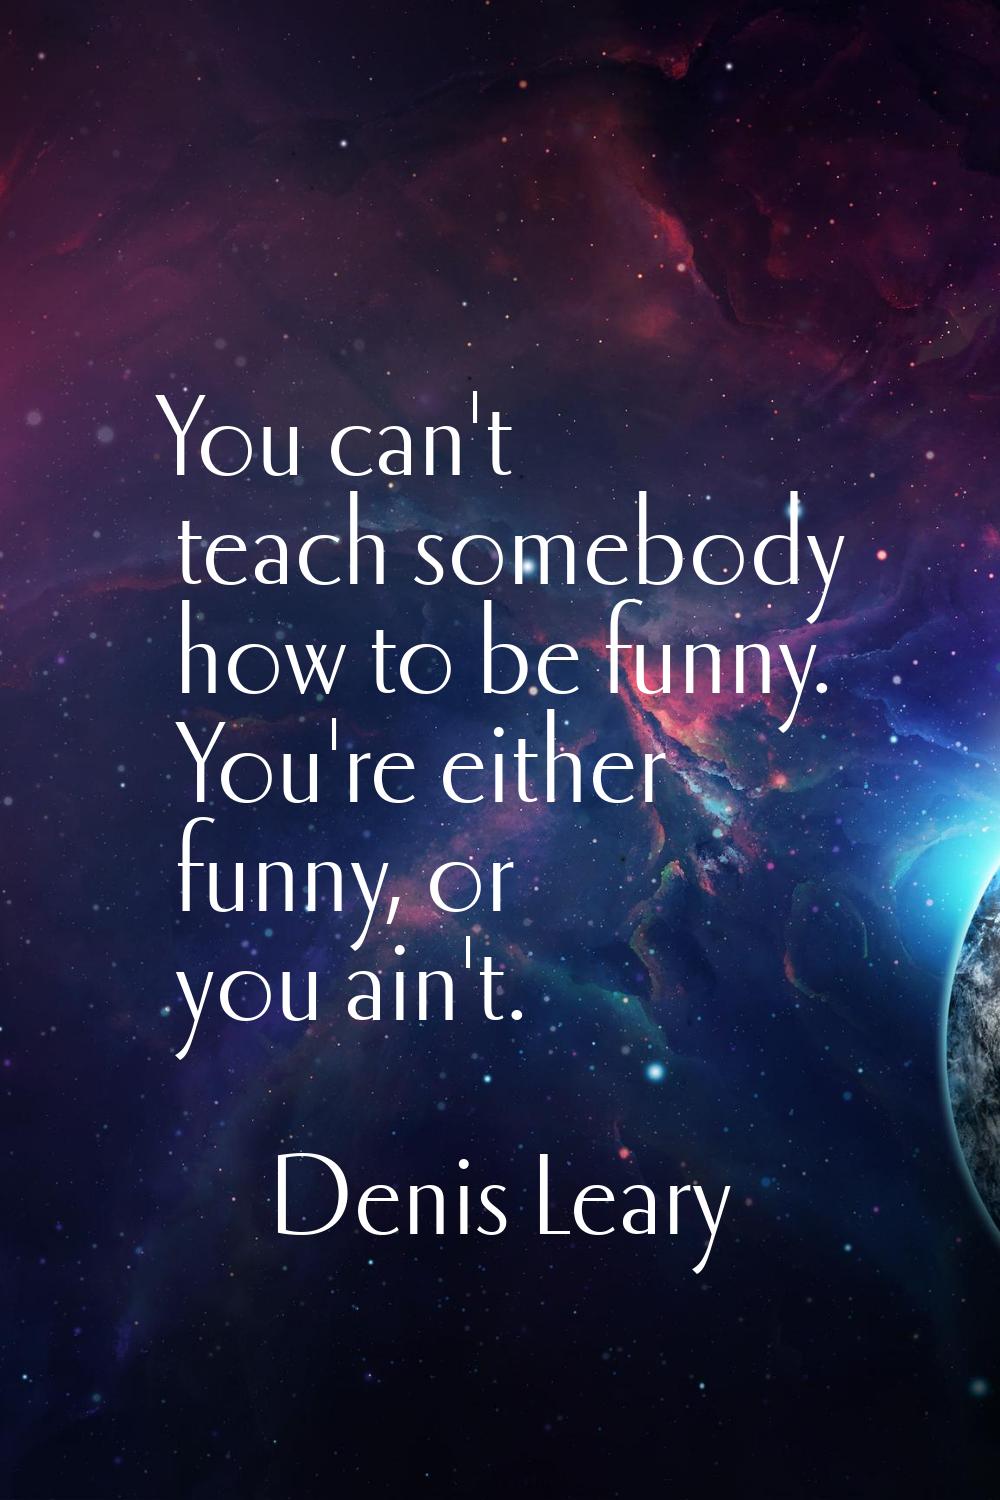 You can't teach somebody how to be funny. You're either funny, or you ain't.